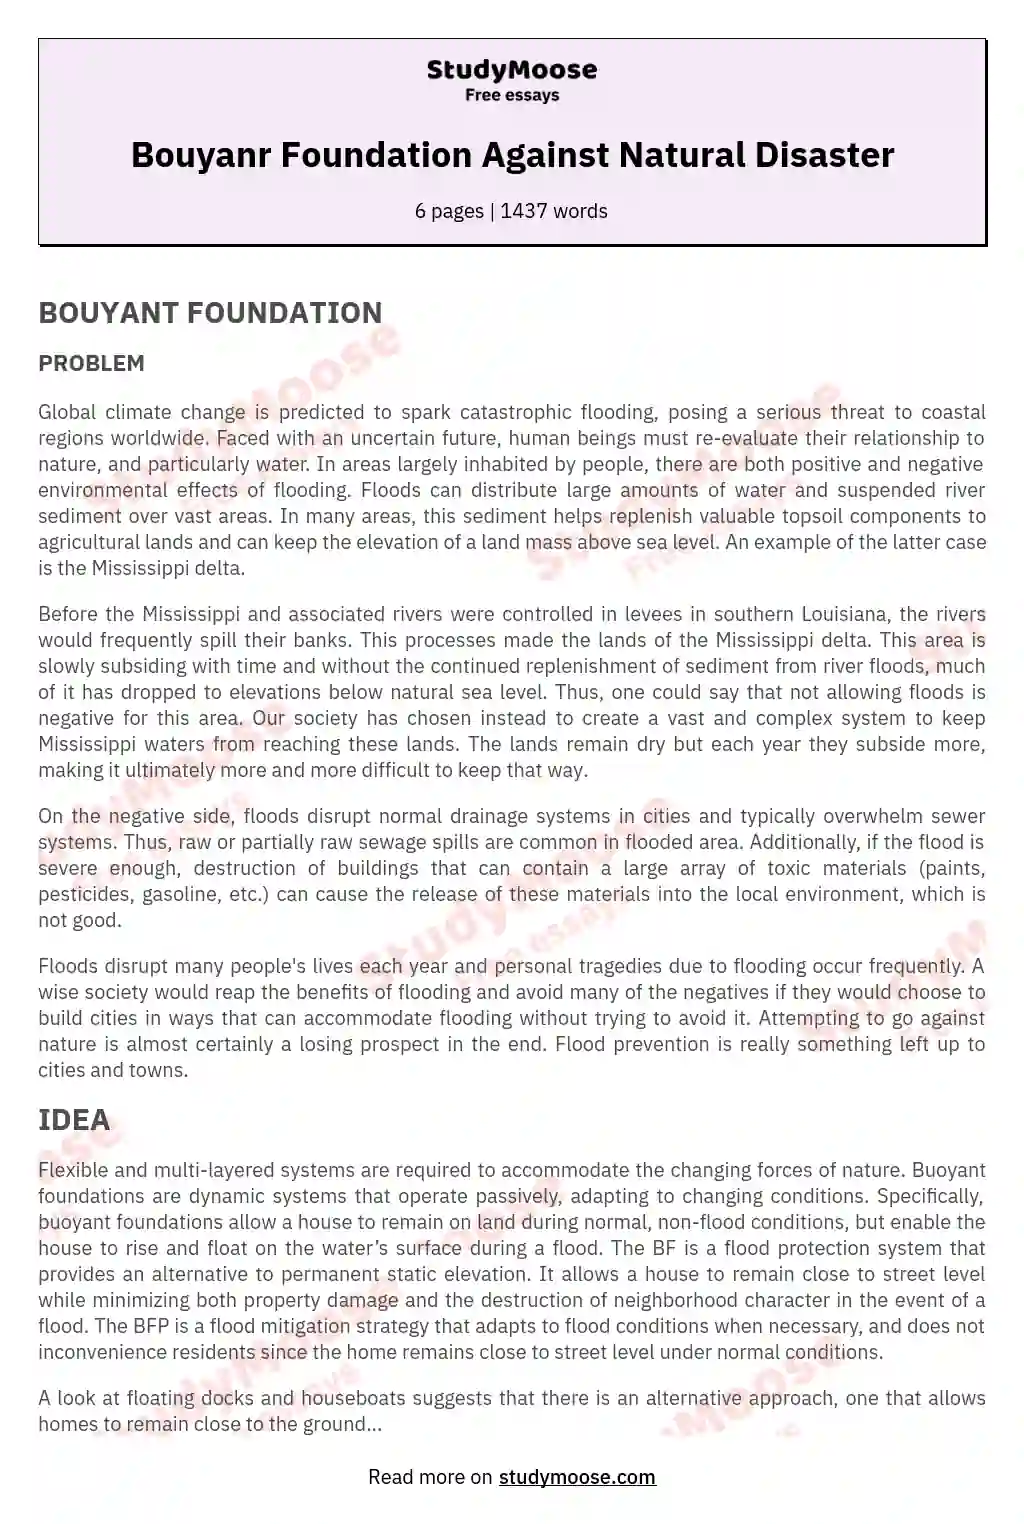 Bouyanr Foundation Against Natural Disaster essay